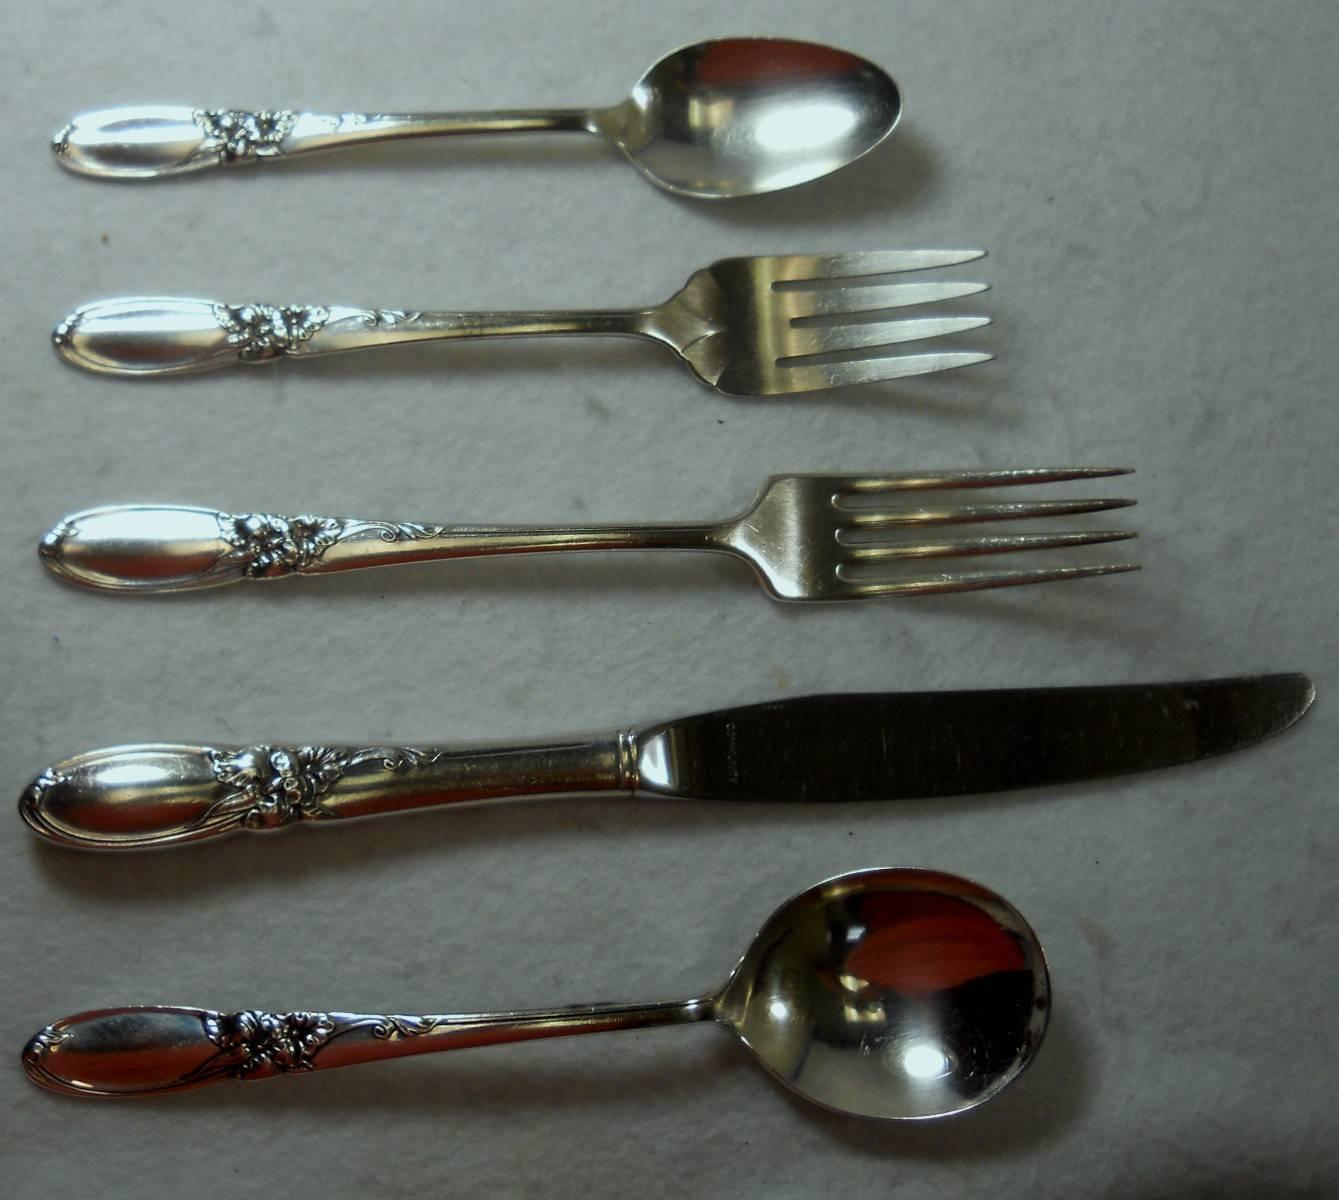 In great condition free from stain or discoloration and with only a minimum of use.

Mfg 1953. 

Silver plate.

Includes 12 knifes, 12 dinner forks, 12 salad forks, 24 teaspoons, 12 round bowl cream soup or gumbo spoons, one solid serving